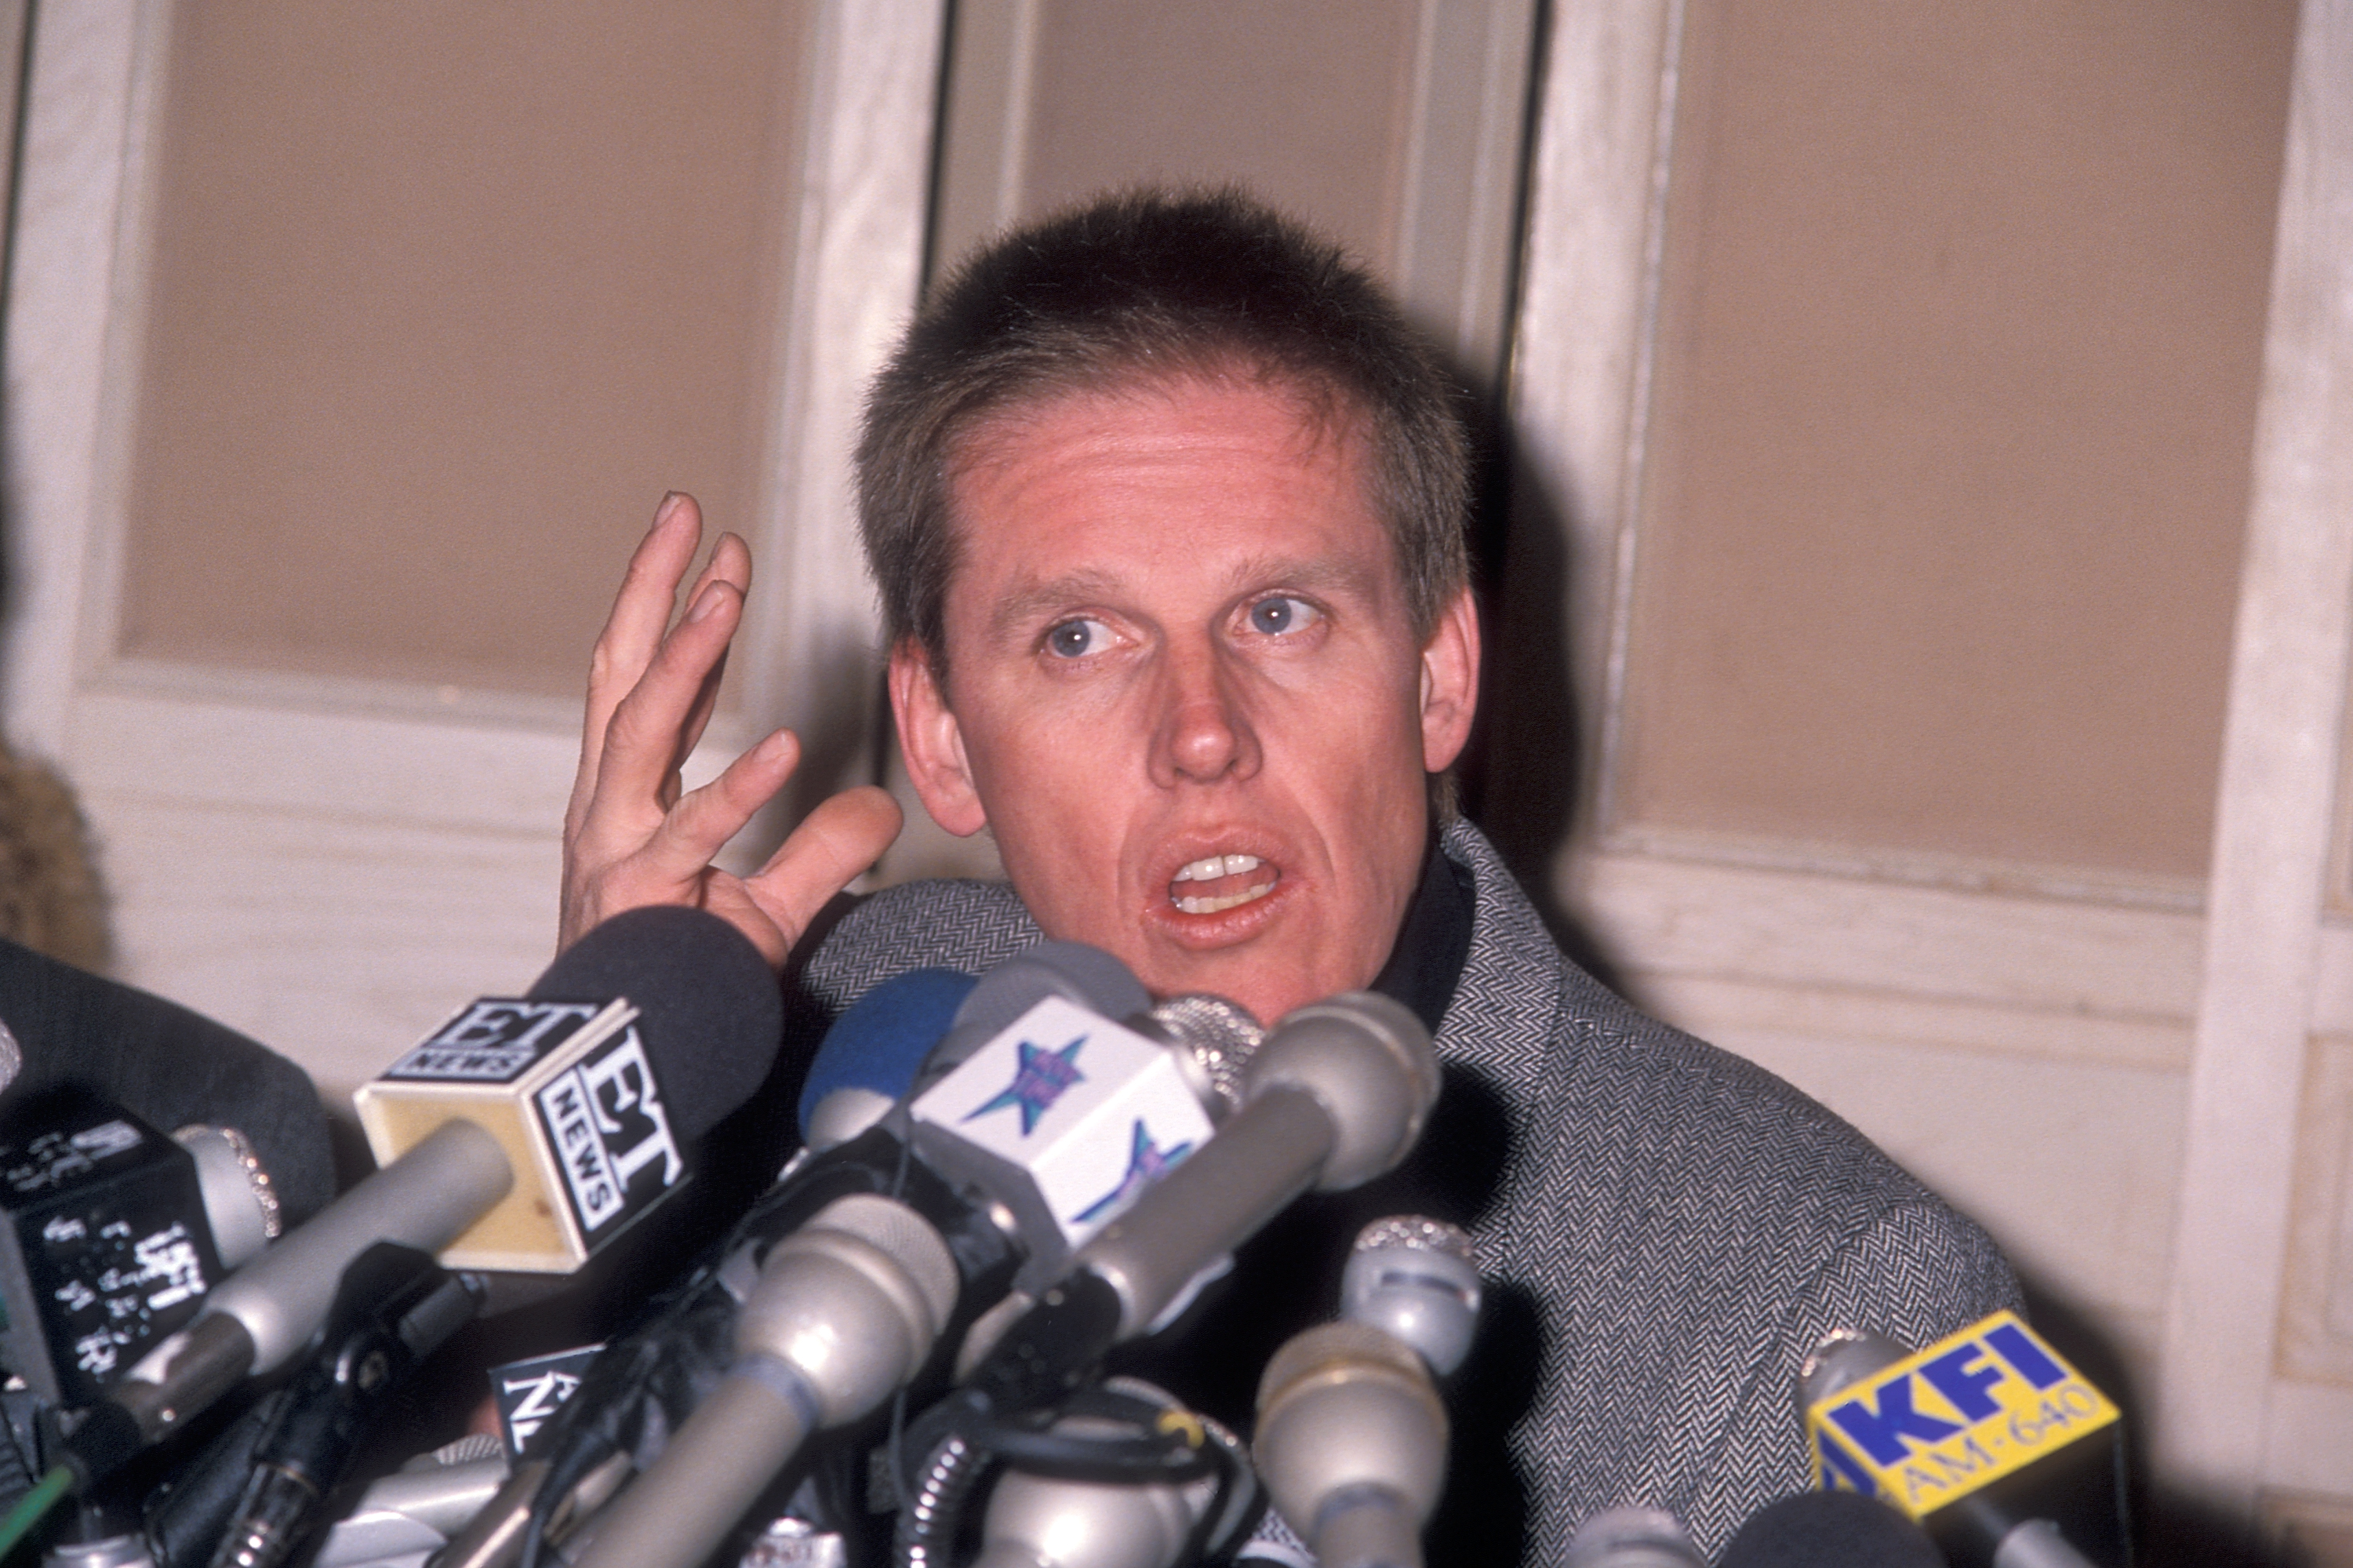 Gary Busey speaks to the press about his near fatal motorcycle accident on December 4, 1988, on March 1, 1989 at the Beverly Hills Hotel in Beverly Hills, California. | Source: Getty Images